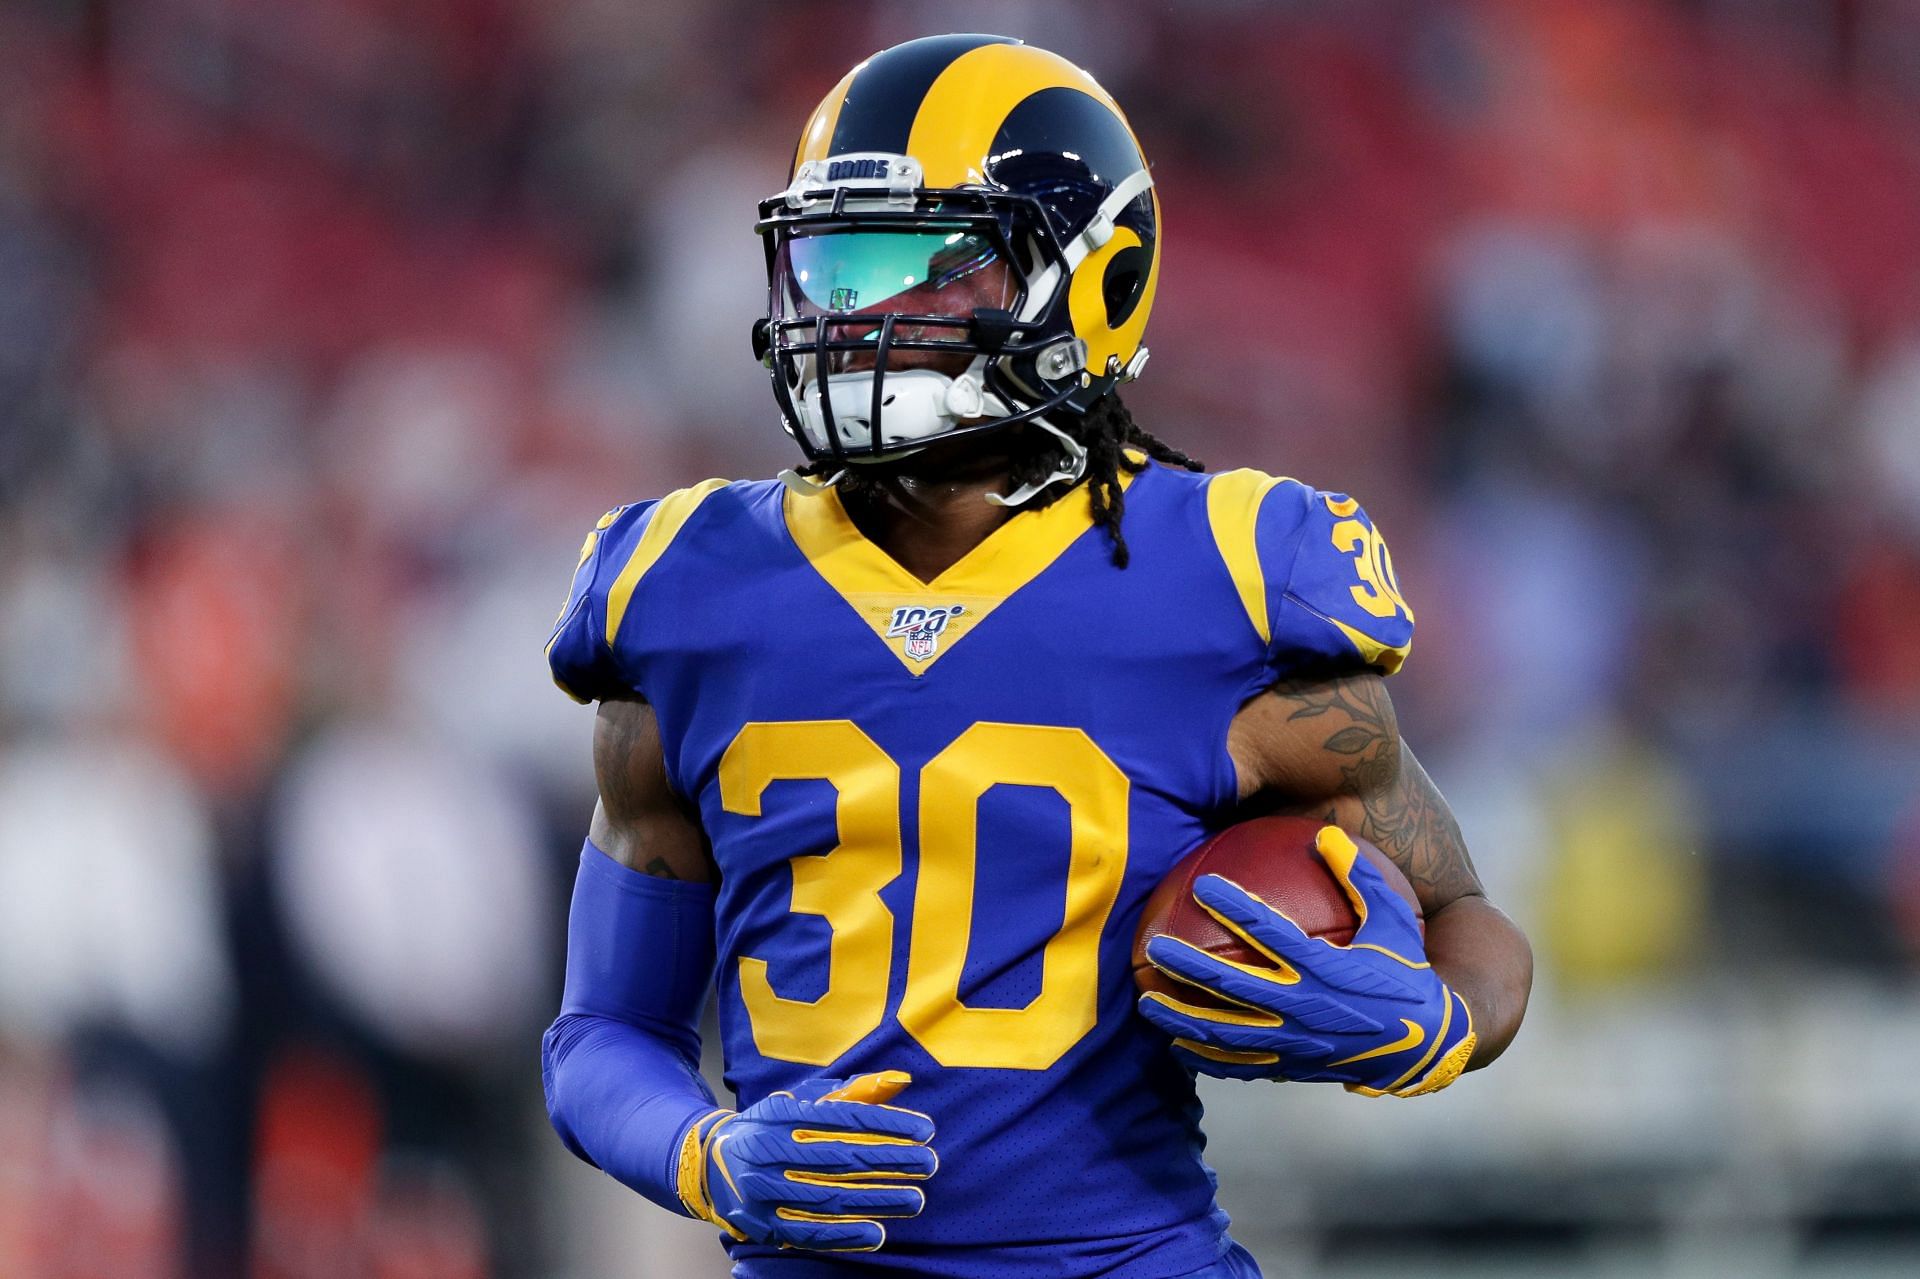 Todd Gurley during his time with the LA Rams